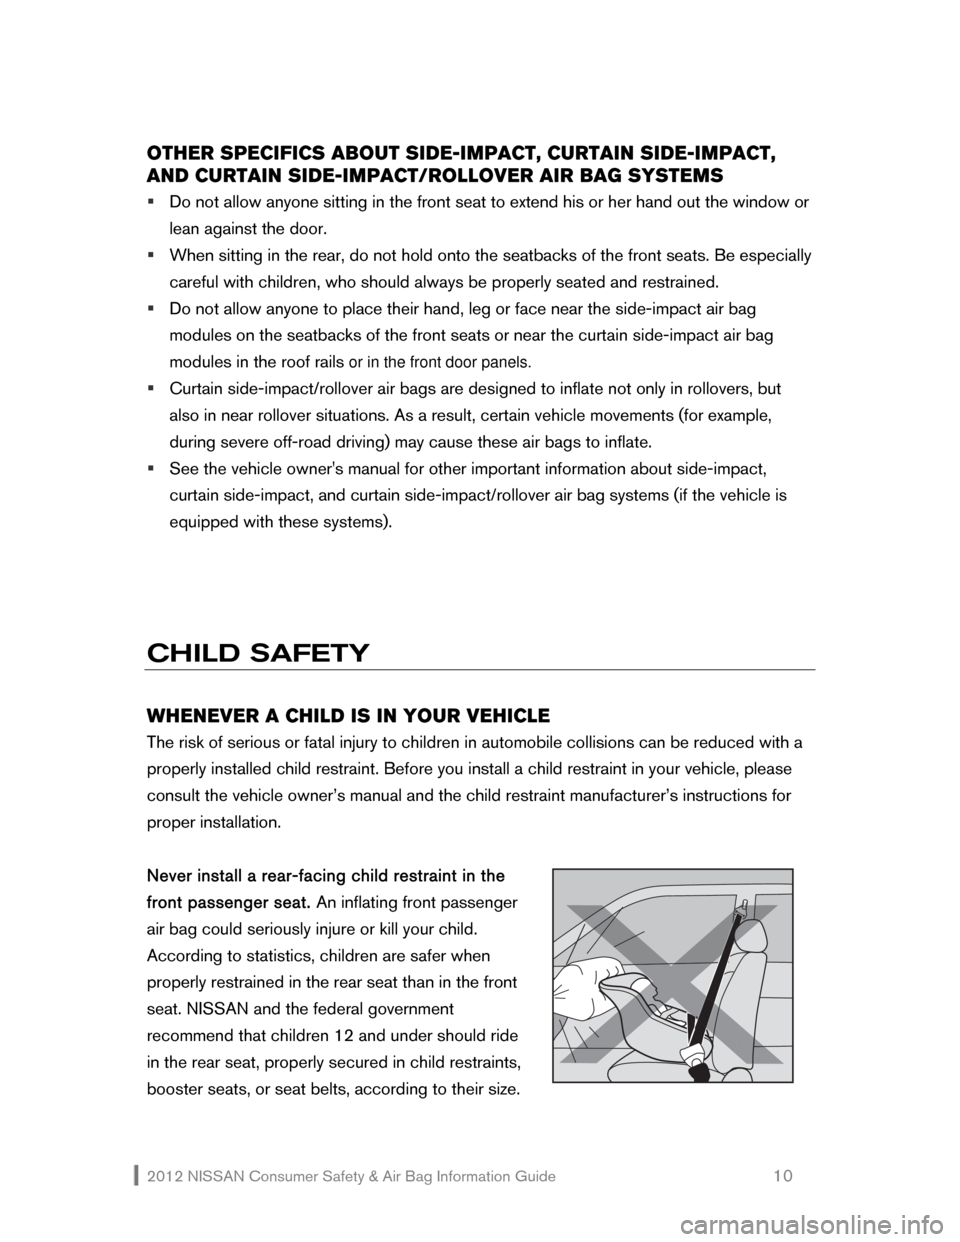 NISSAN MAXIMA 2012 A35 / 7.G Consumer Safety Air Bag Information Guide 2012 NISSAN Consumer Safety & Air Bag Information Guide                                                   10 
OTHER SPECIFICS ABOUT SIDE-IMPACT, CURTAIN SIDE-IMPACT, 
AND CURTAIN SIDE-IMPACT/ROLLOVER 